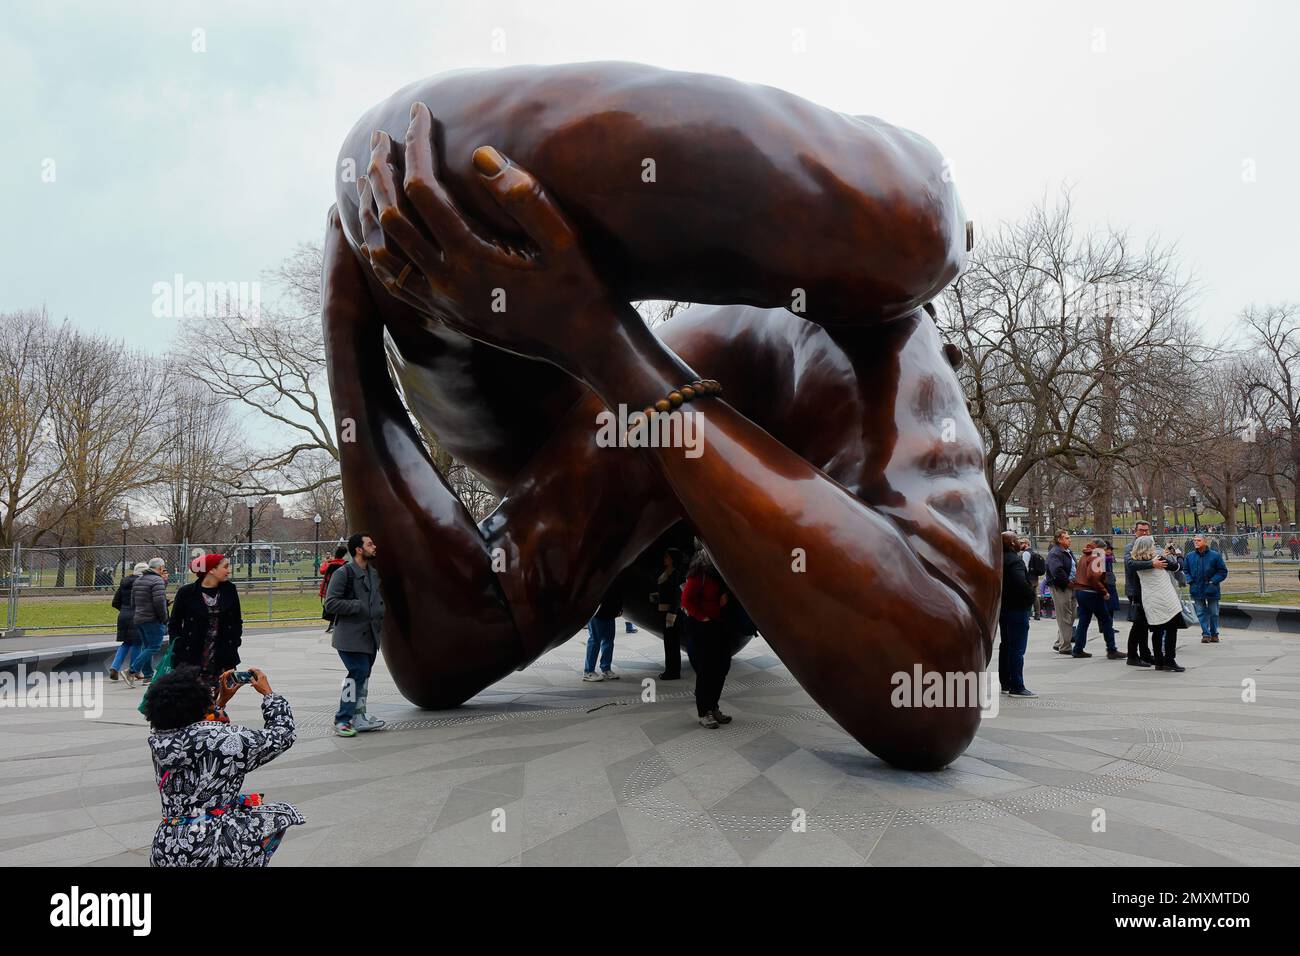 People and tourists at The Embrace sculpture in the Boston Commons, Boston, Massachusetts. Stock Photo